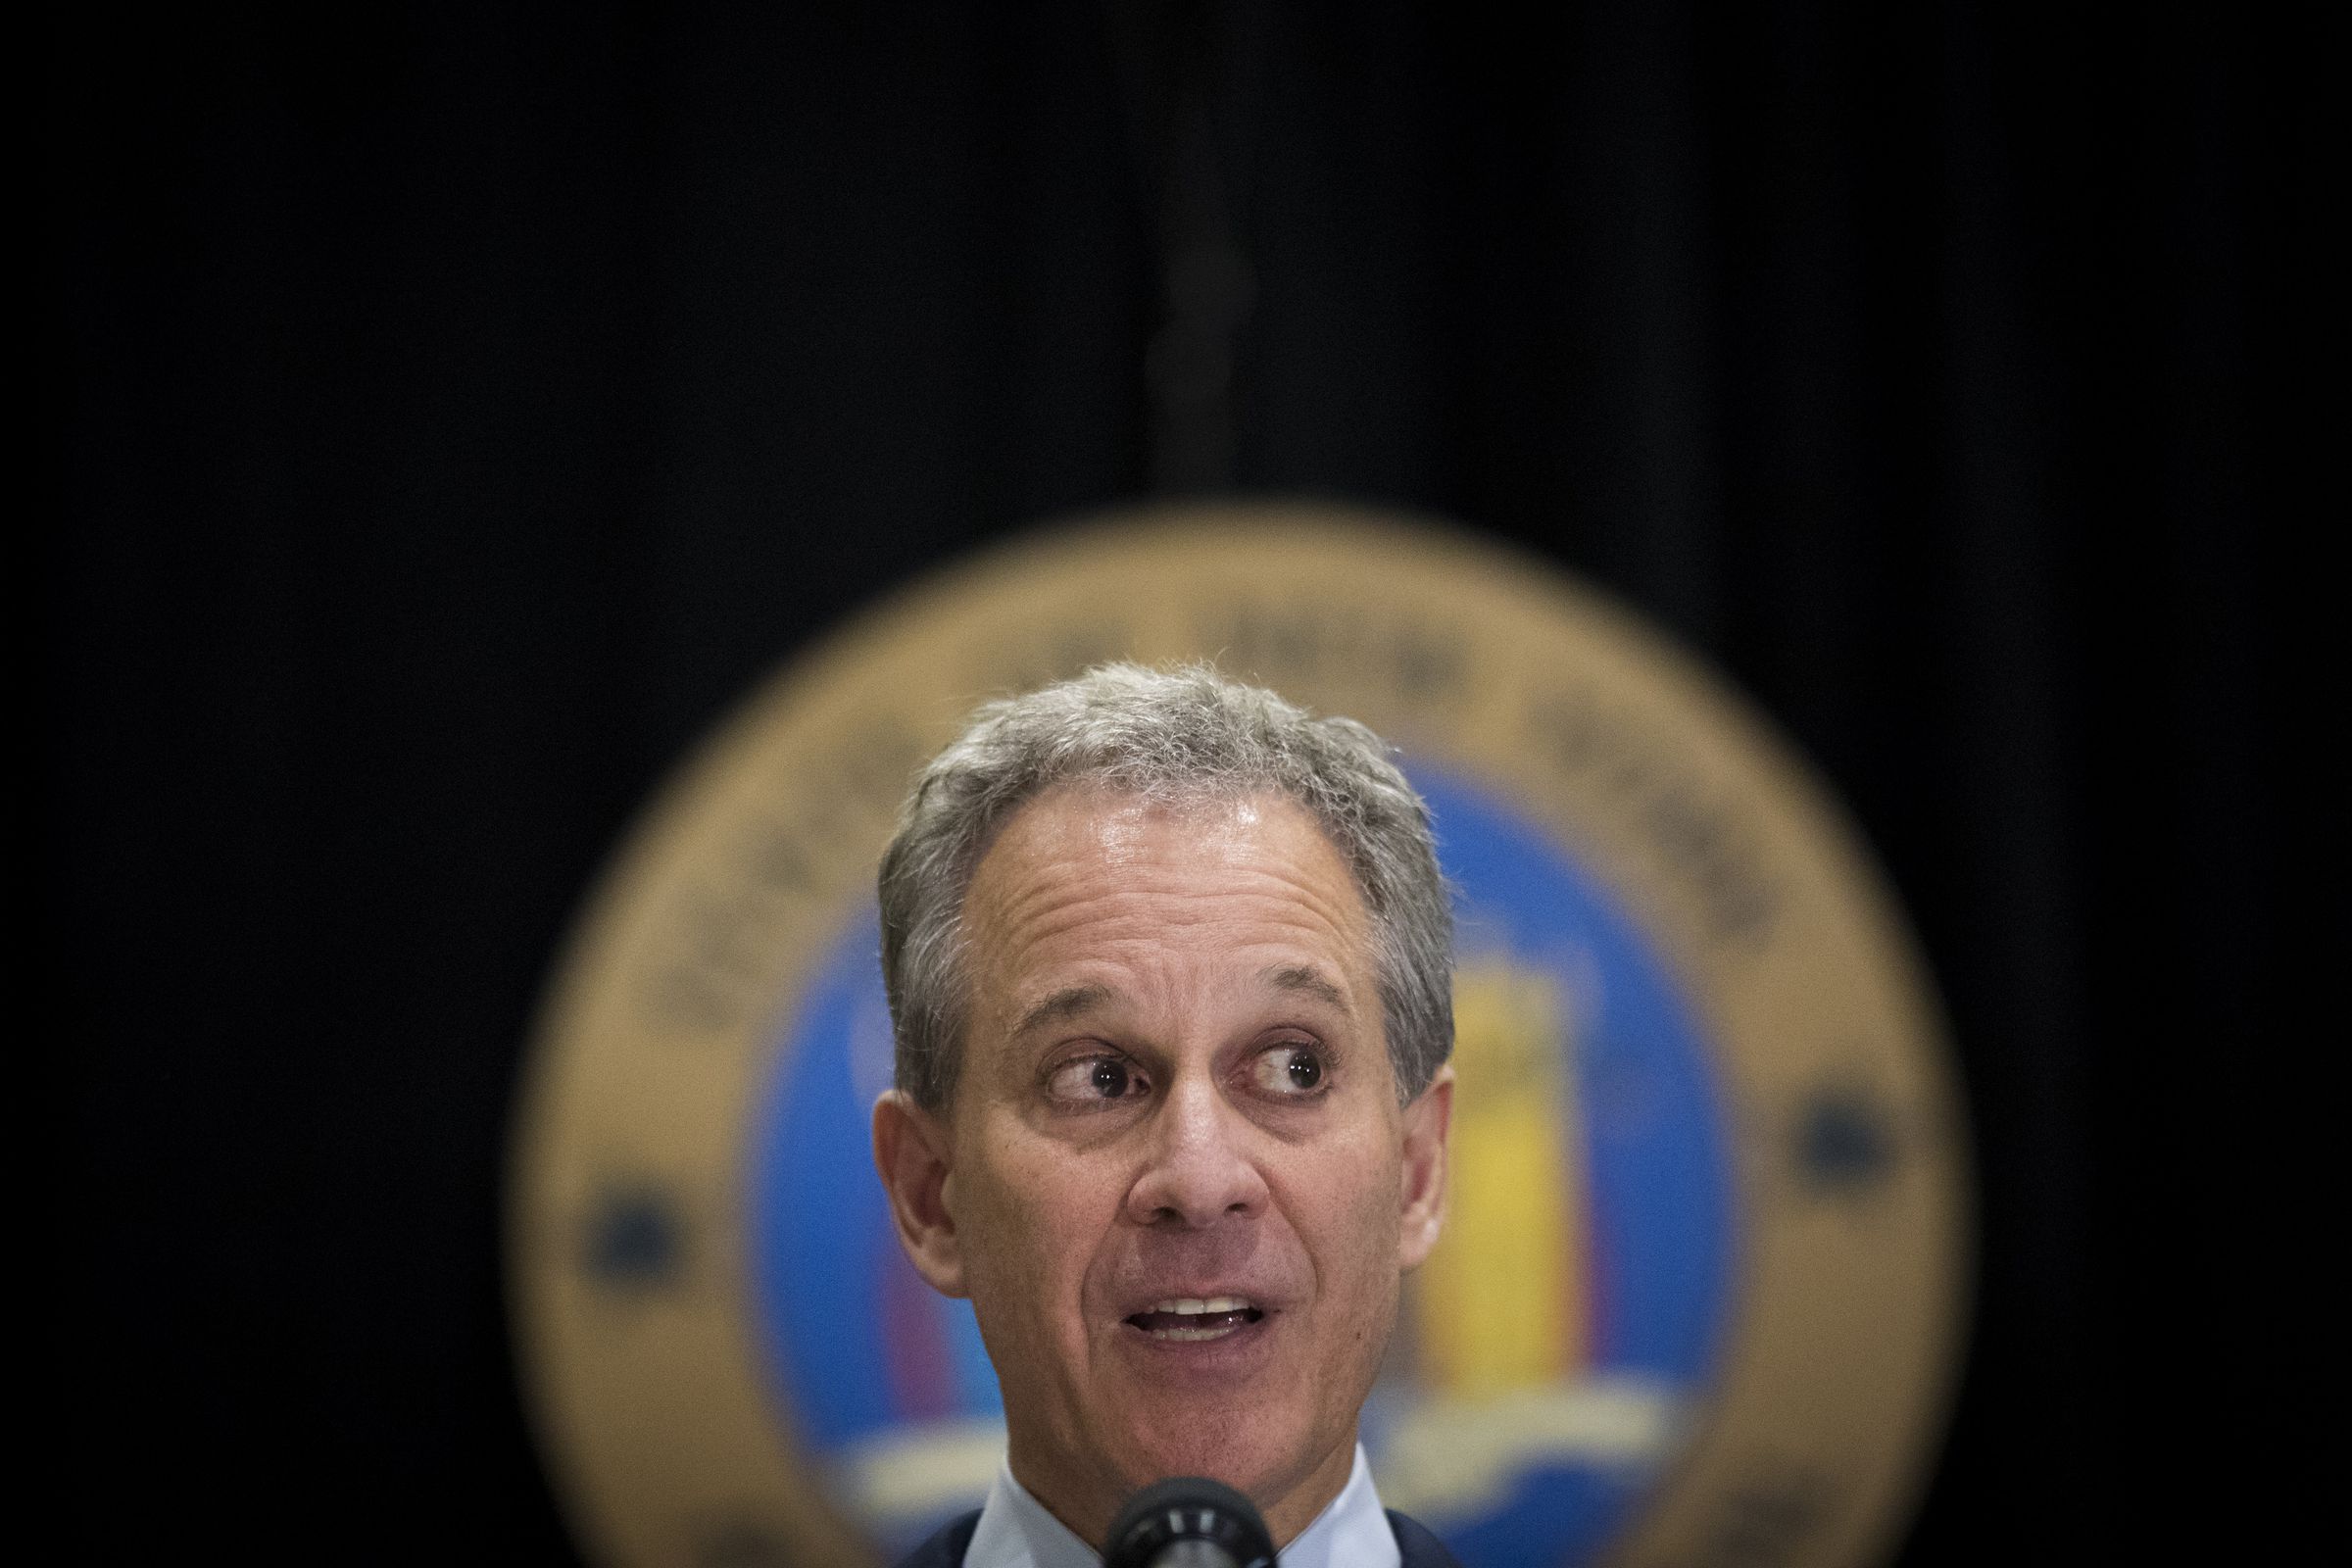 New York Attorney General Schneiderman Announces Multistate Lawsuit To Protect DACA Recipients